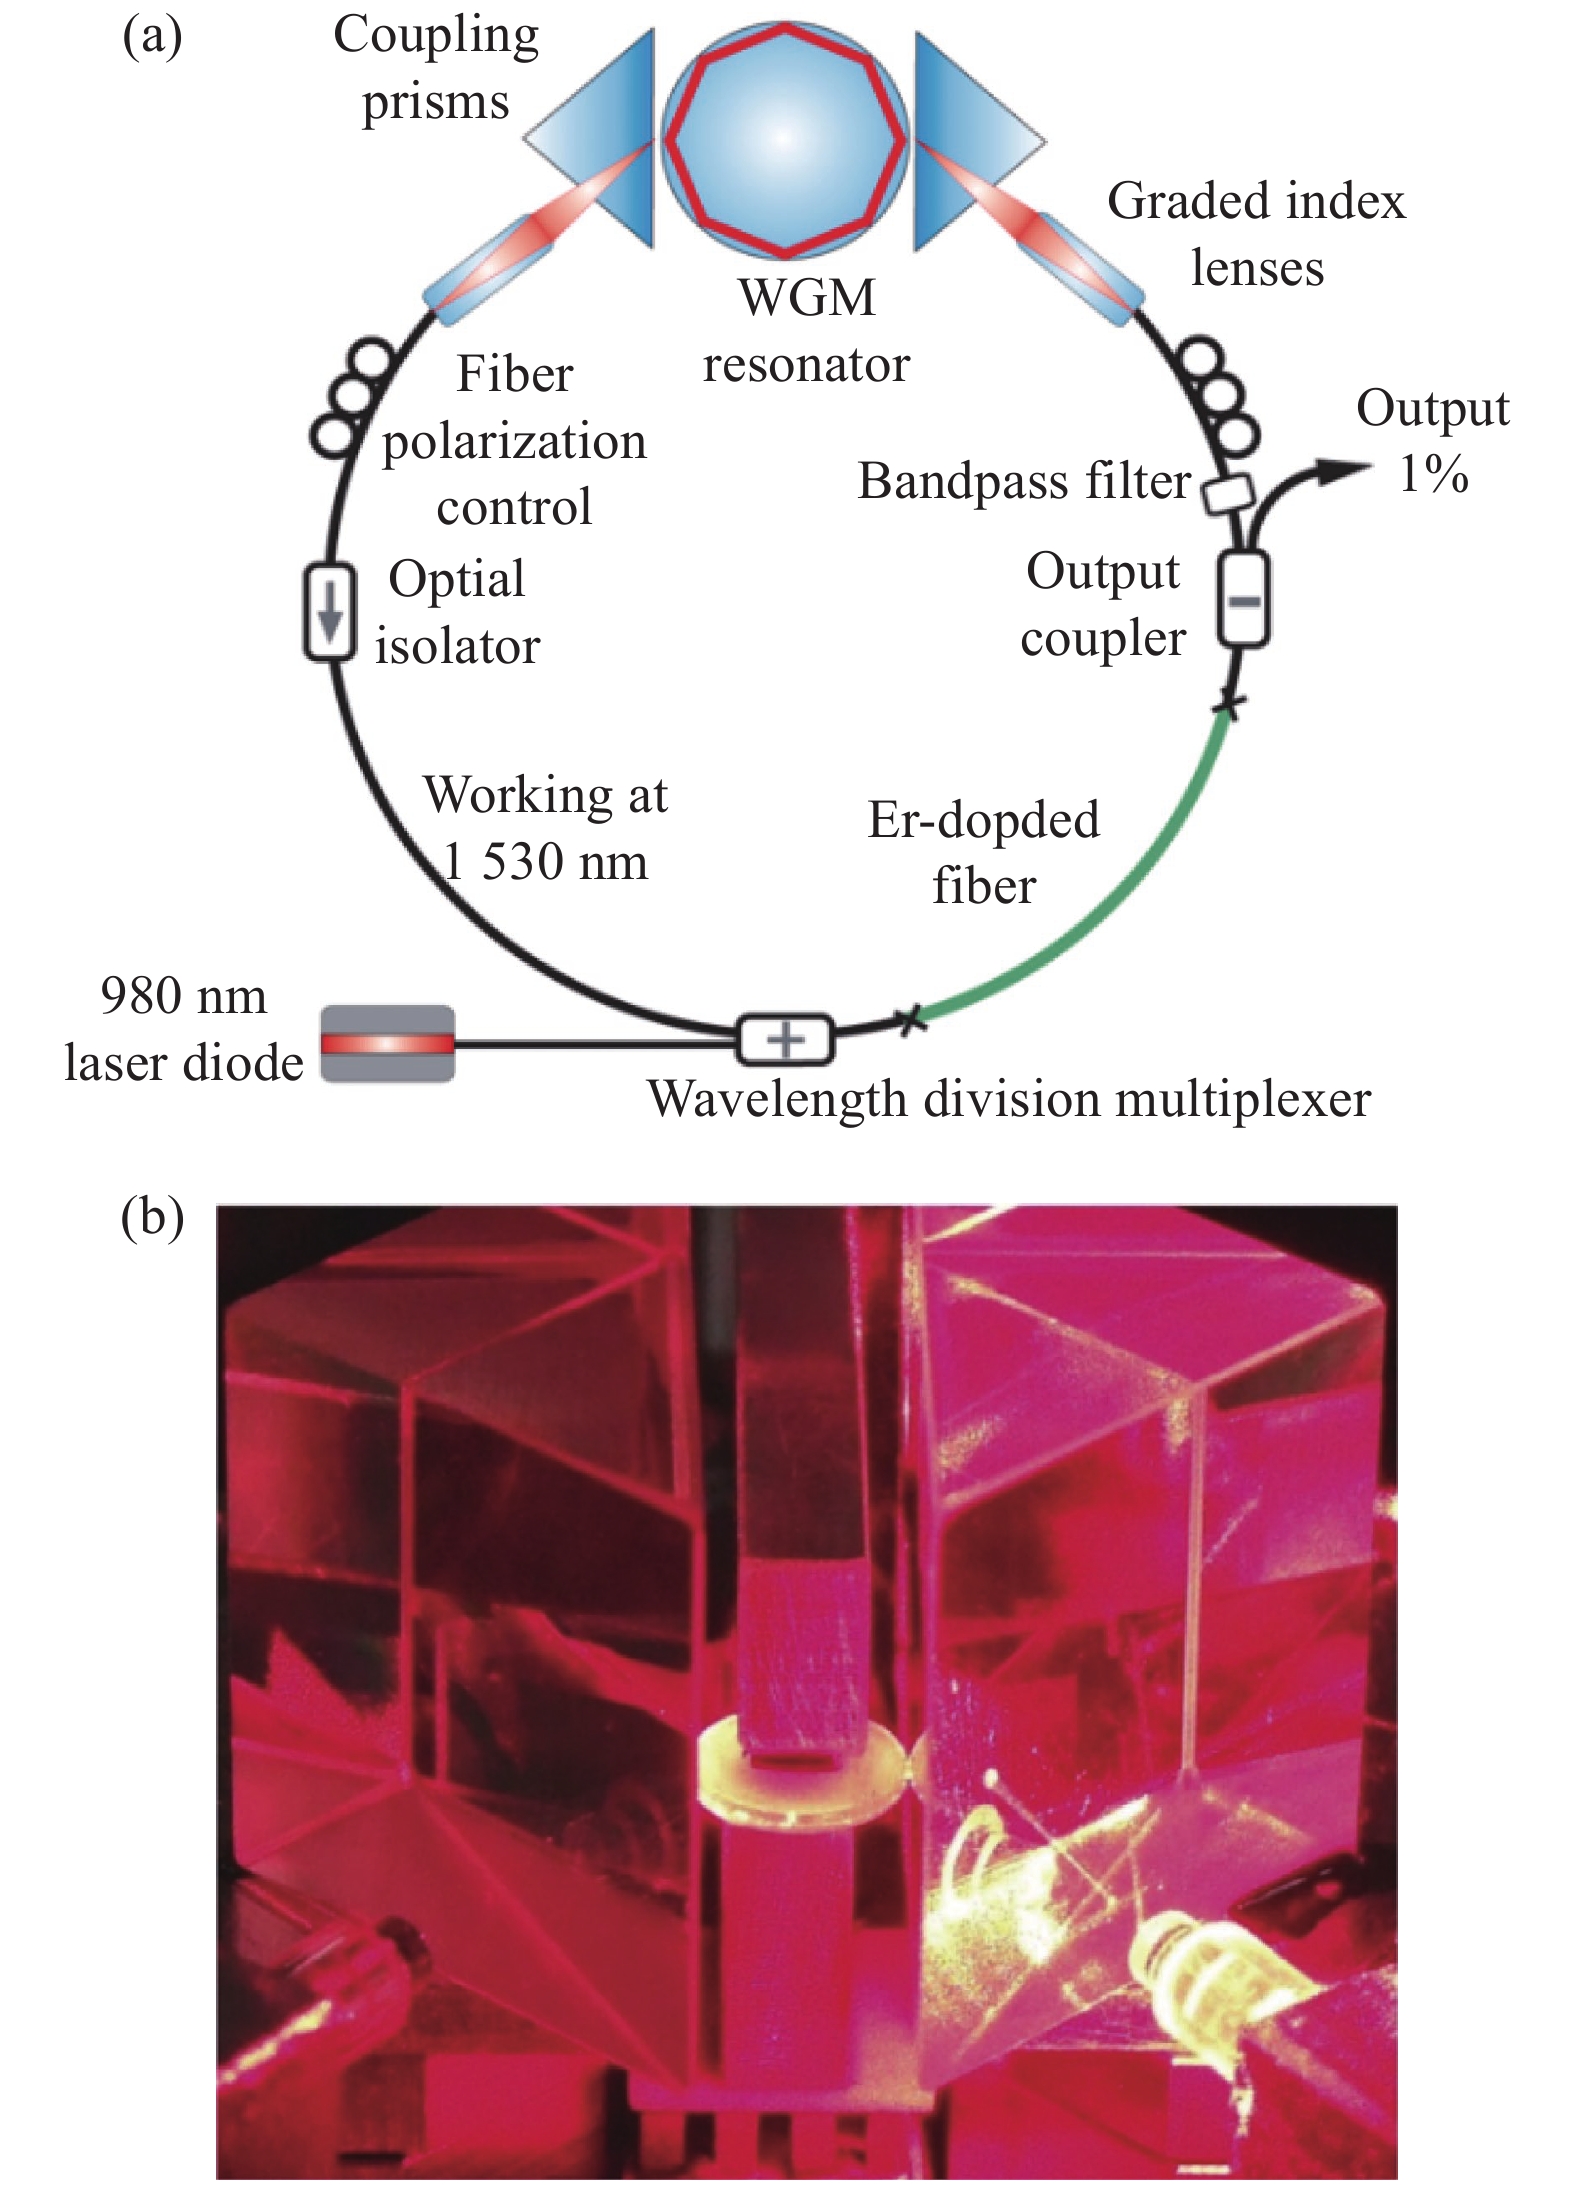 (a) Schematic of the narrow-linewidth single-frequency Er3+-doped fiber laser based on a whispering gallery mode (WGM) micro-resonator; (b) Photograph of the WGM resonator[10]